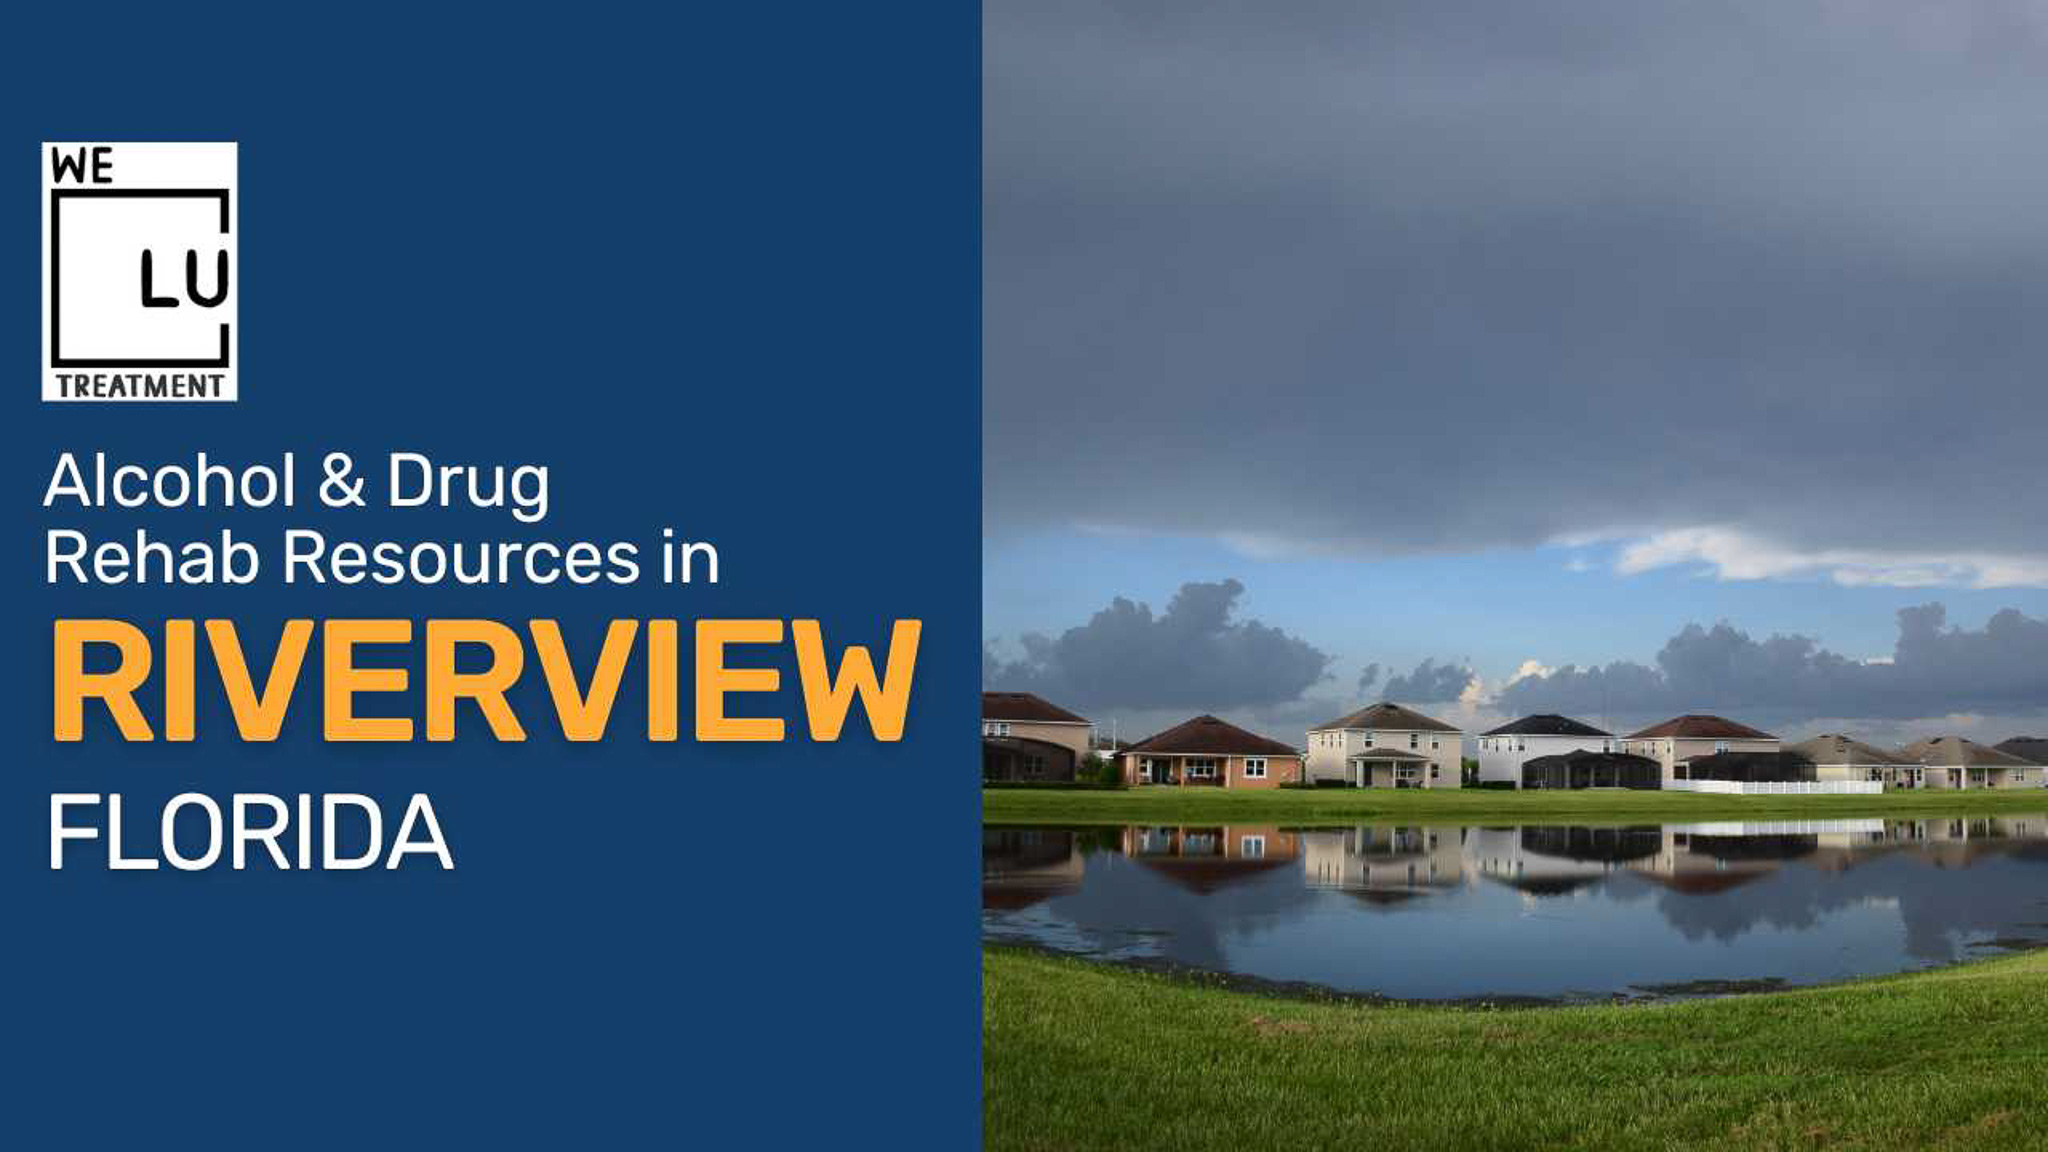 Riverview FL (SA) We Level Up treatment center for drug and alcohol rehab detox and mental health services - Image 1